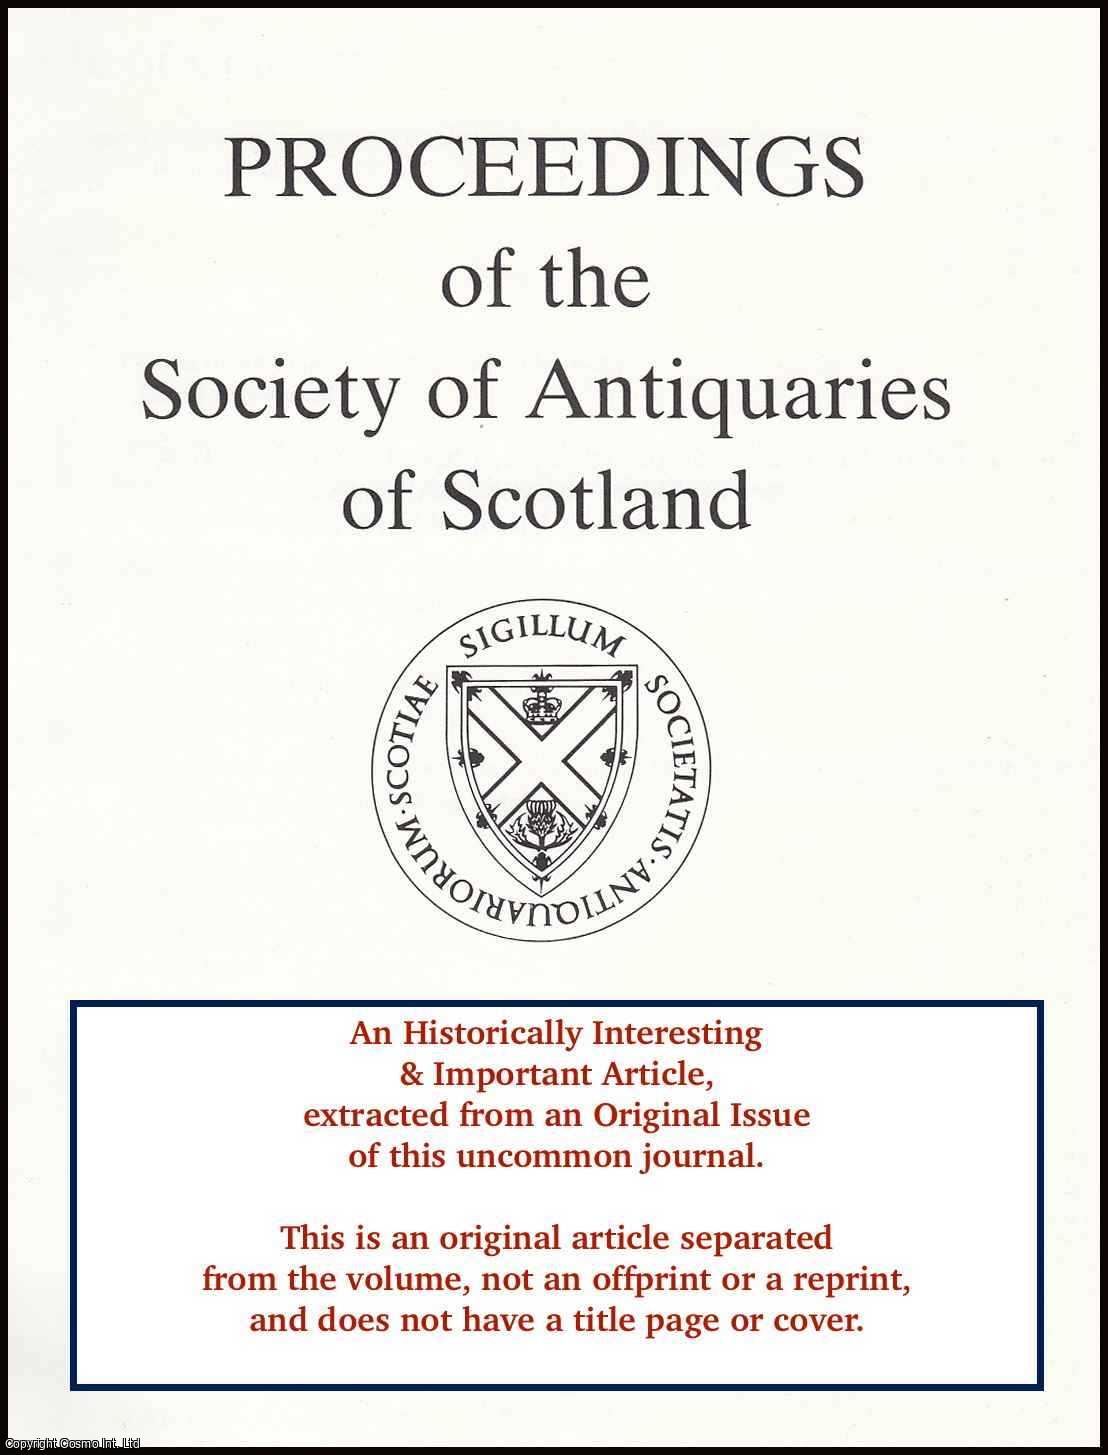 John Linge - The Cinderella Service: The Ordanance Survey and The Mapping of The Antonine Wall. An original article from the Proceedings of the Society of Antiquaries of Scotland, 2004.